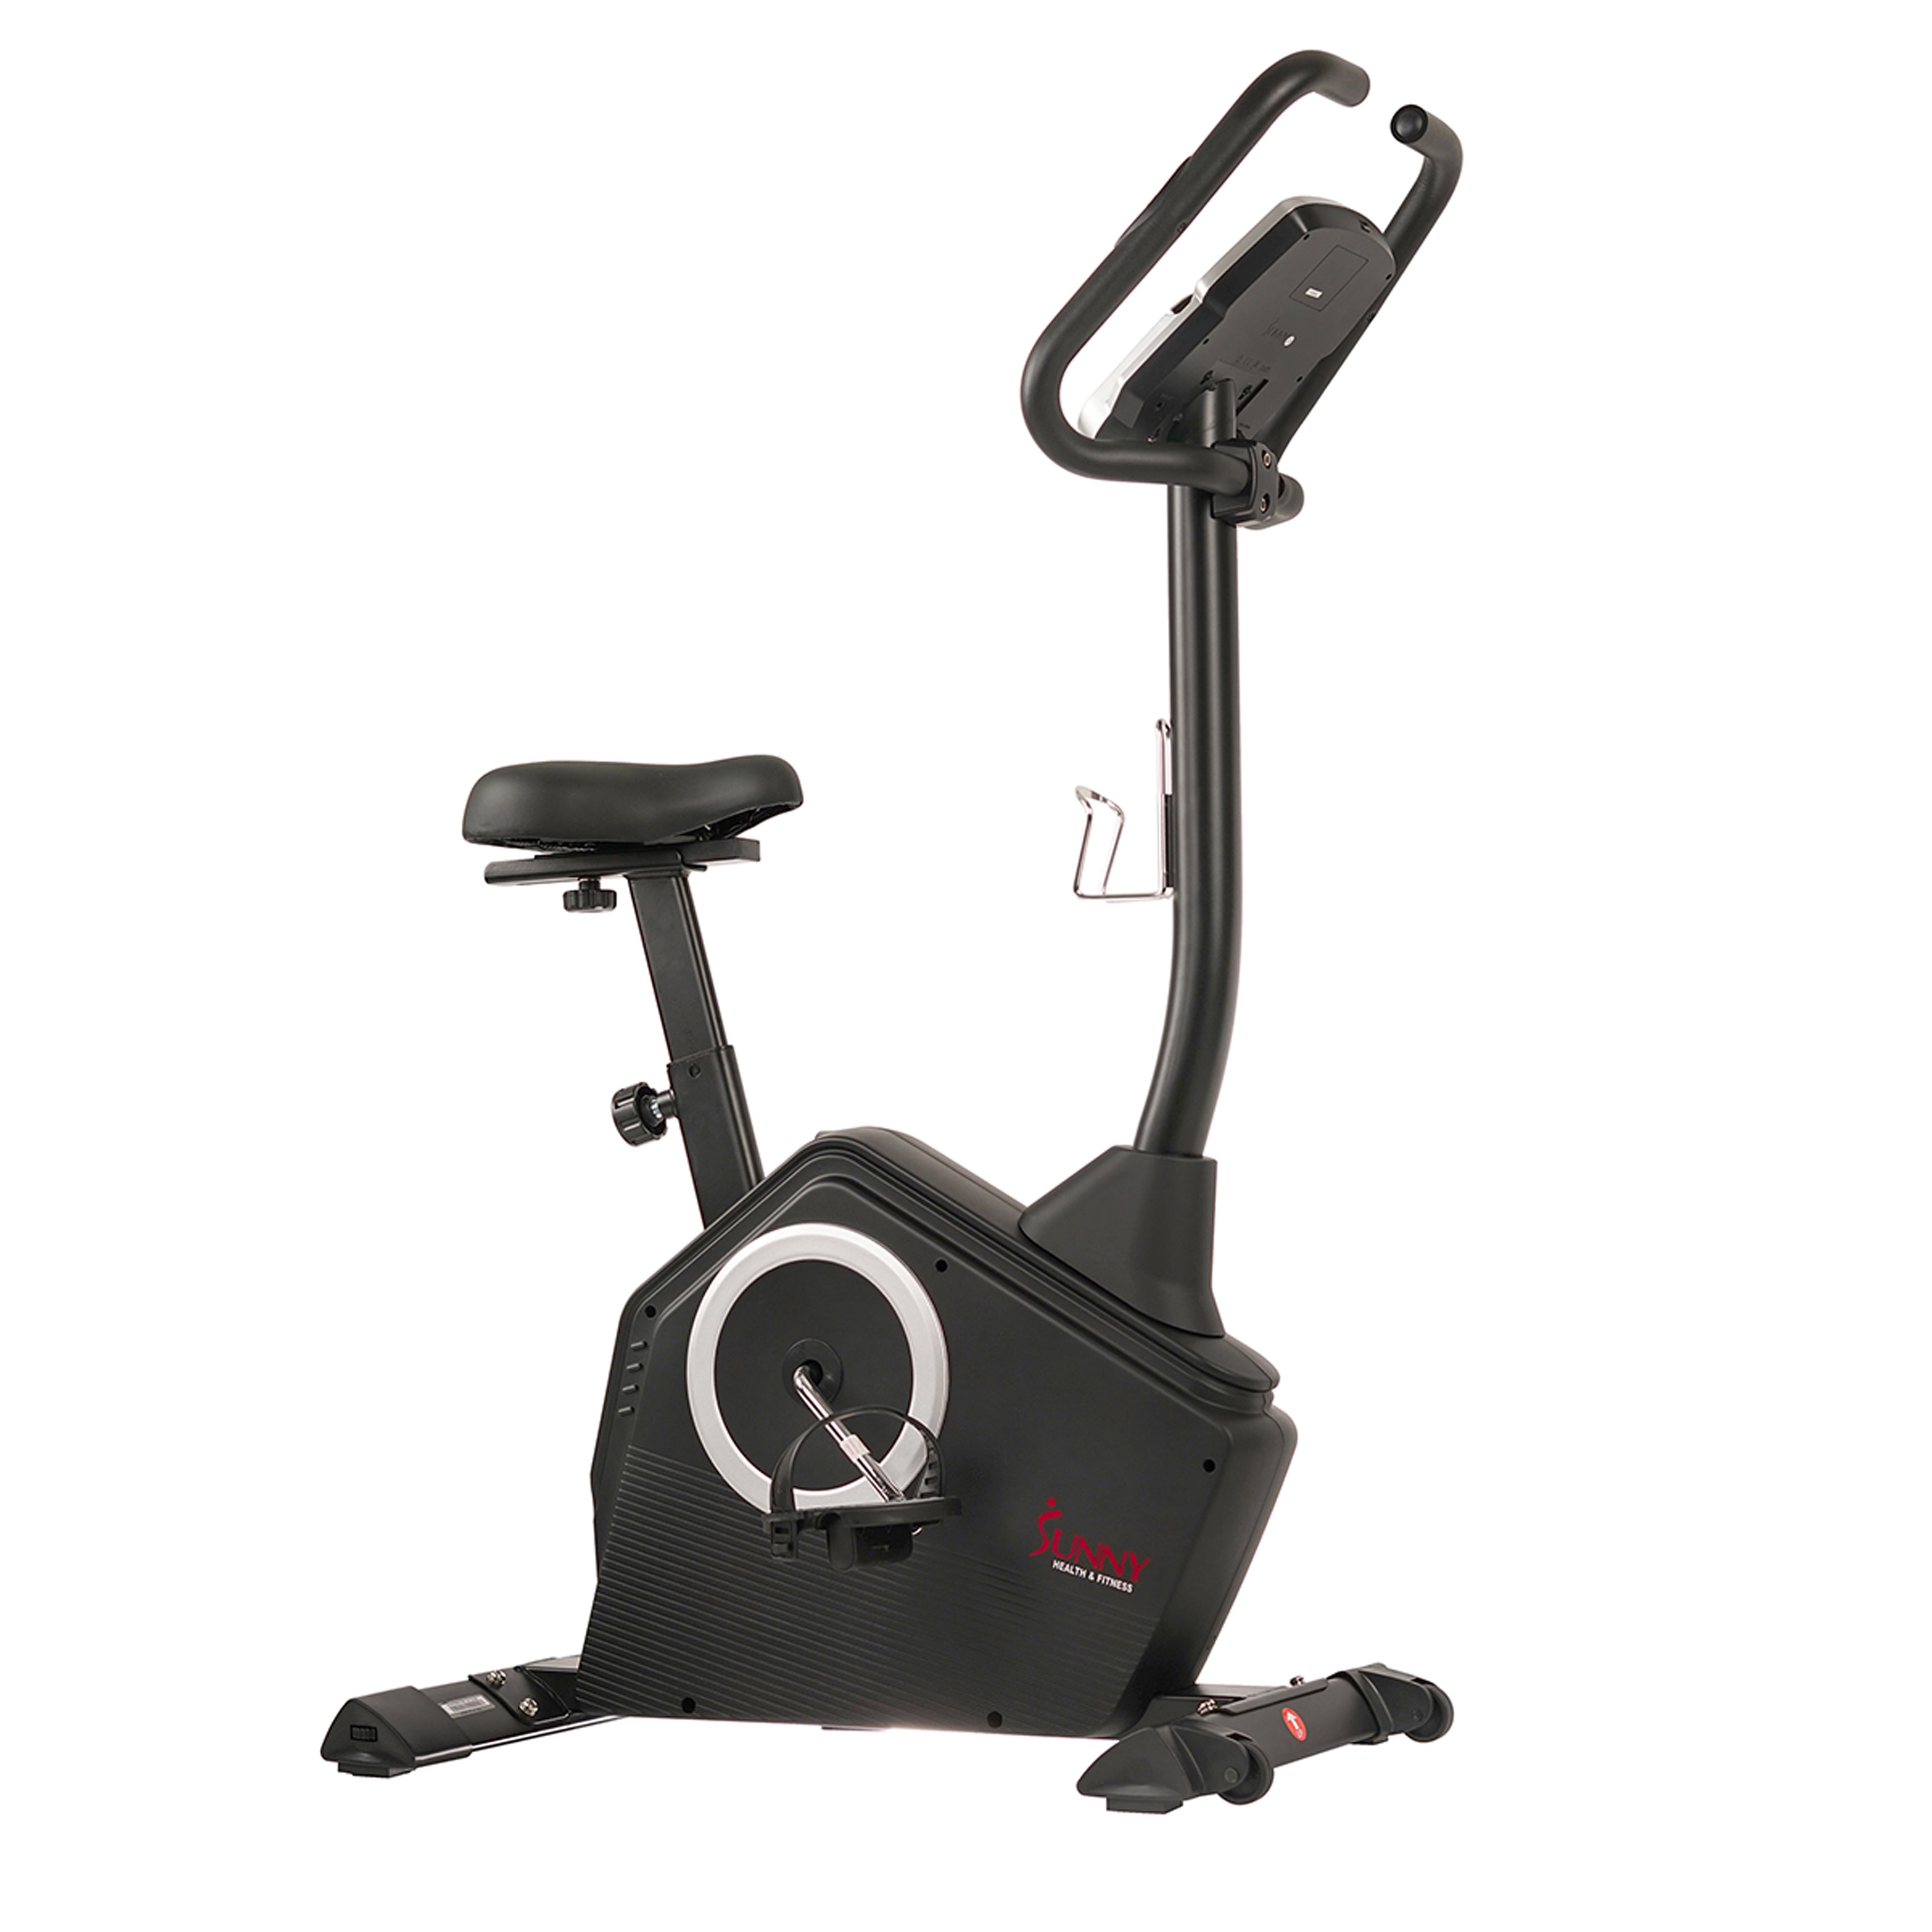 Sunny Health & Fitness Magnetic Upright Exercise Bike w/ LCD, Pulse Monitor, Stationary Cycling and Indoor Home Workouts SF-B2883 - image 1 of 9